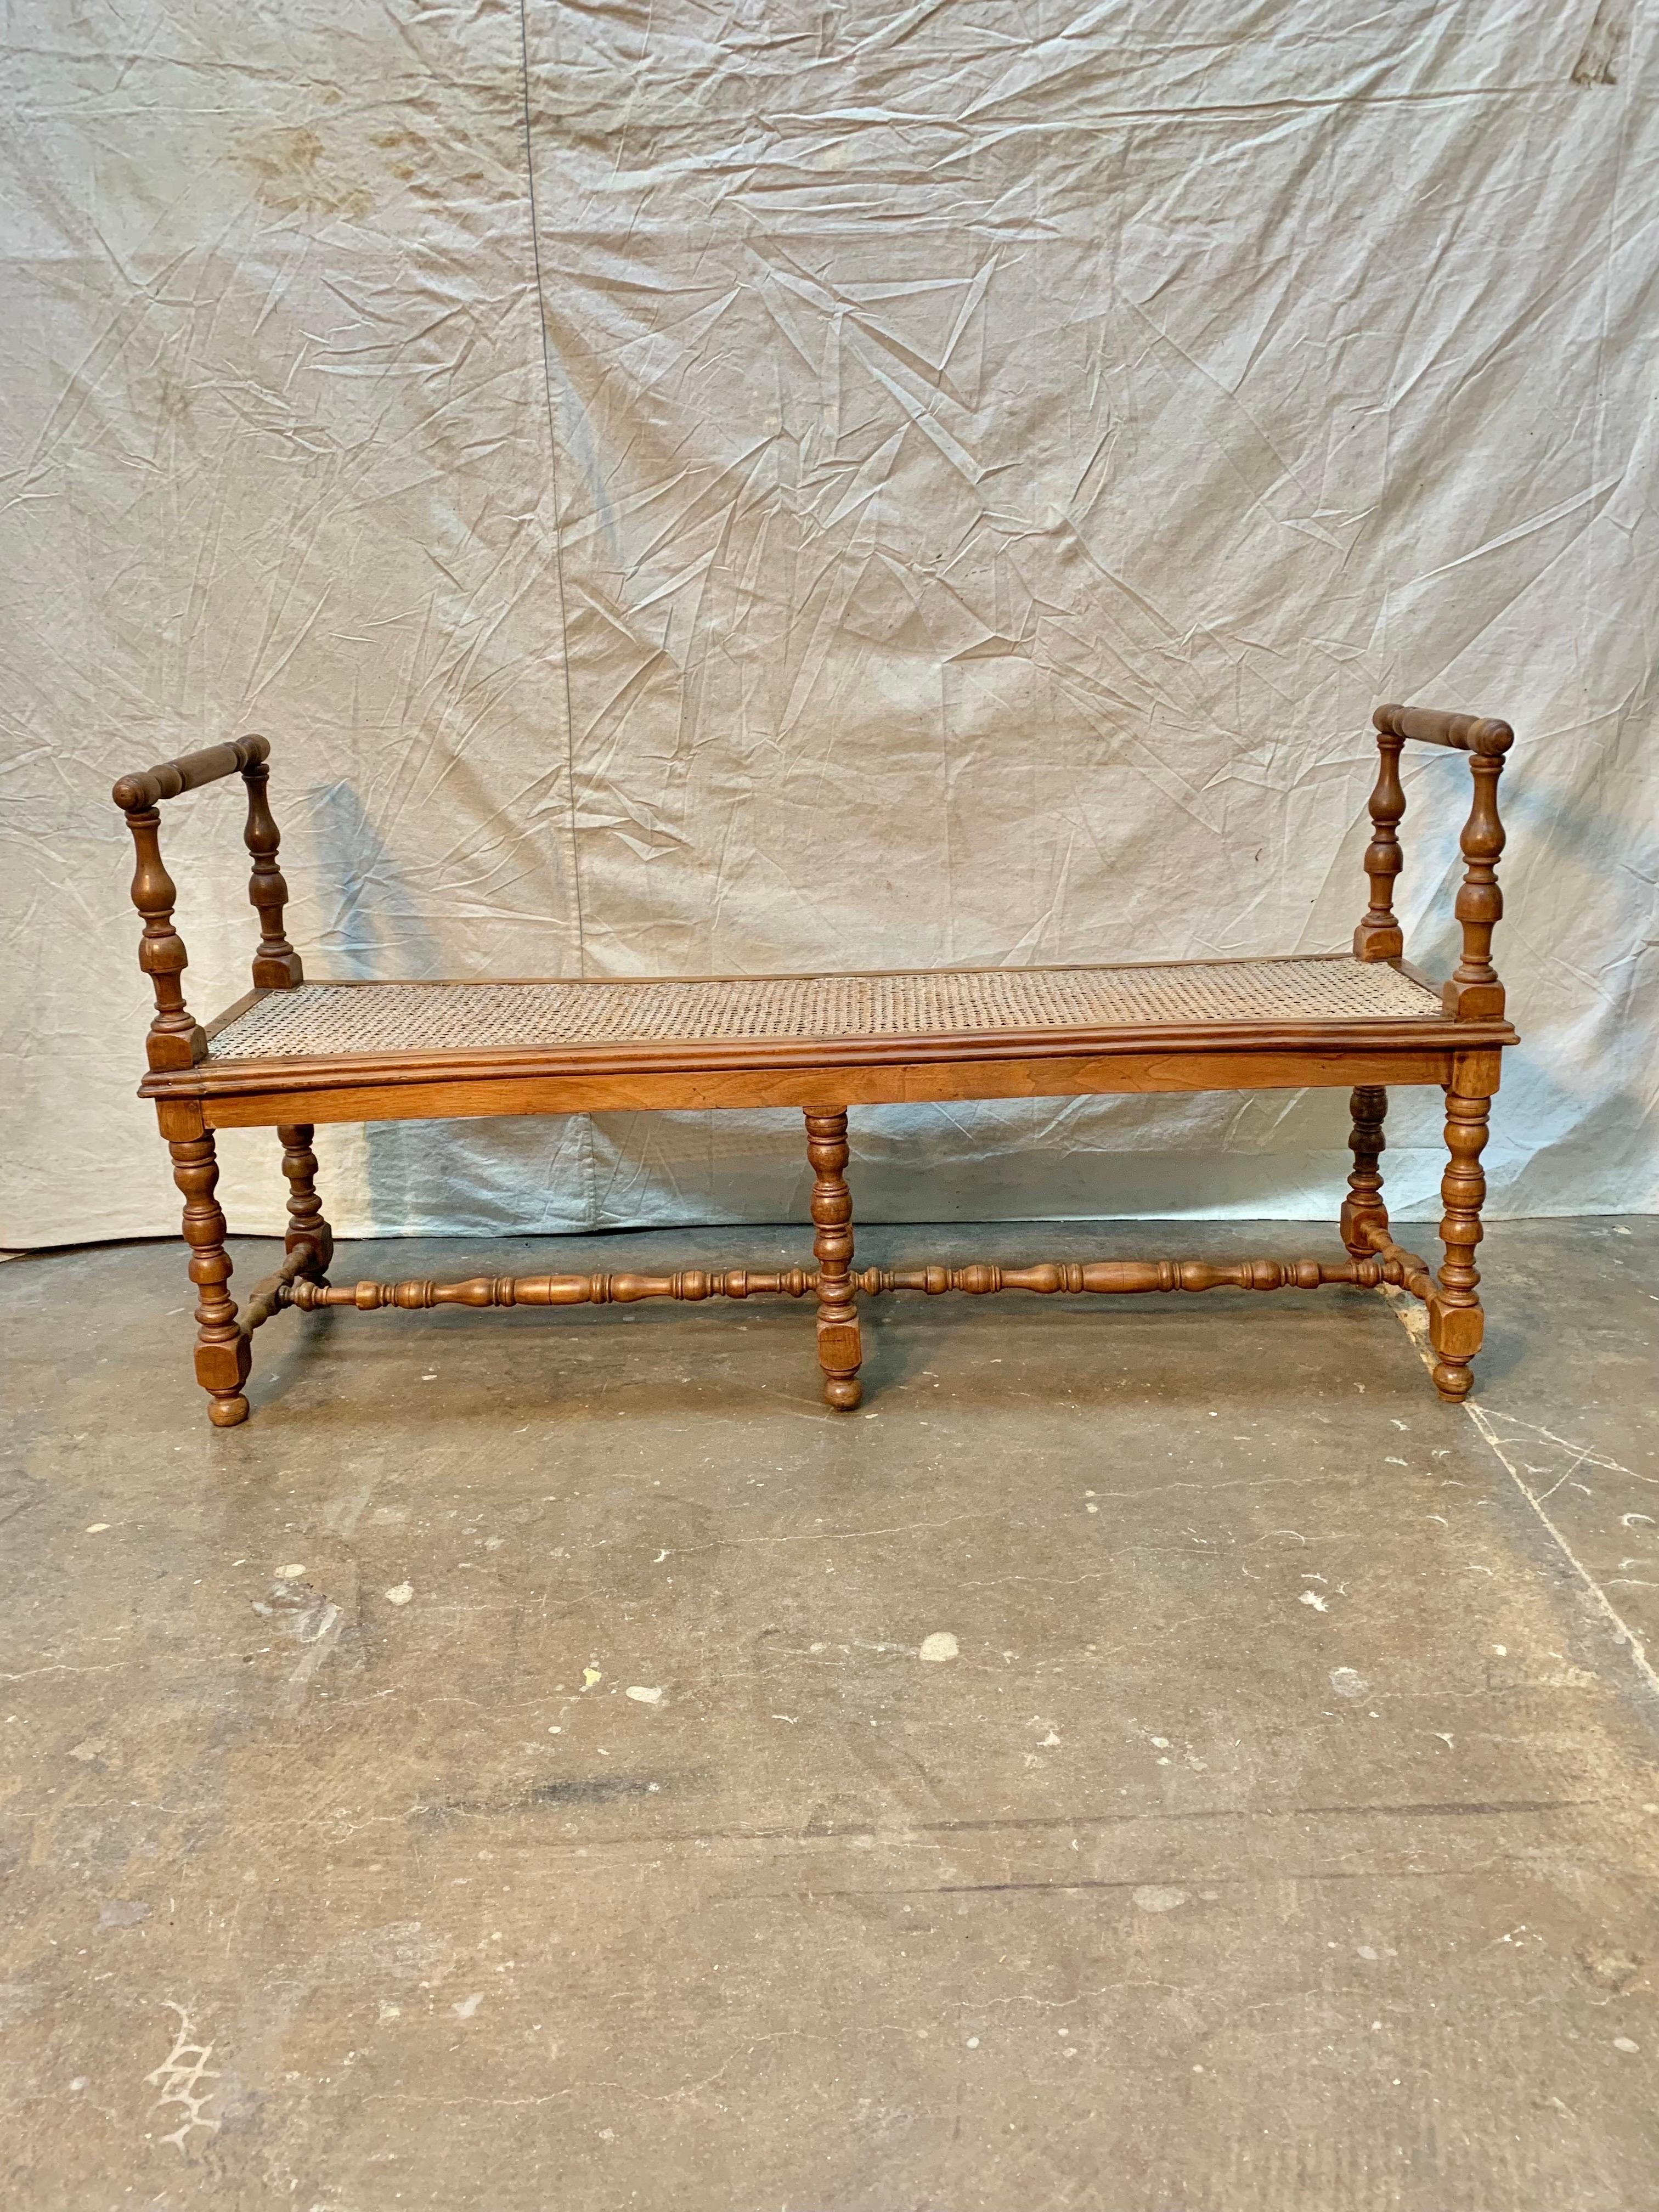 Found in the Burgundy region of France, this Napoleon III bench was crafted in the 19th century from old growth walnut and finished with a cane seat.  The piece features two open air turned armrests on each end that are attached to the wood framed